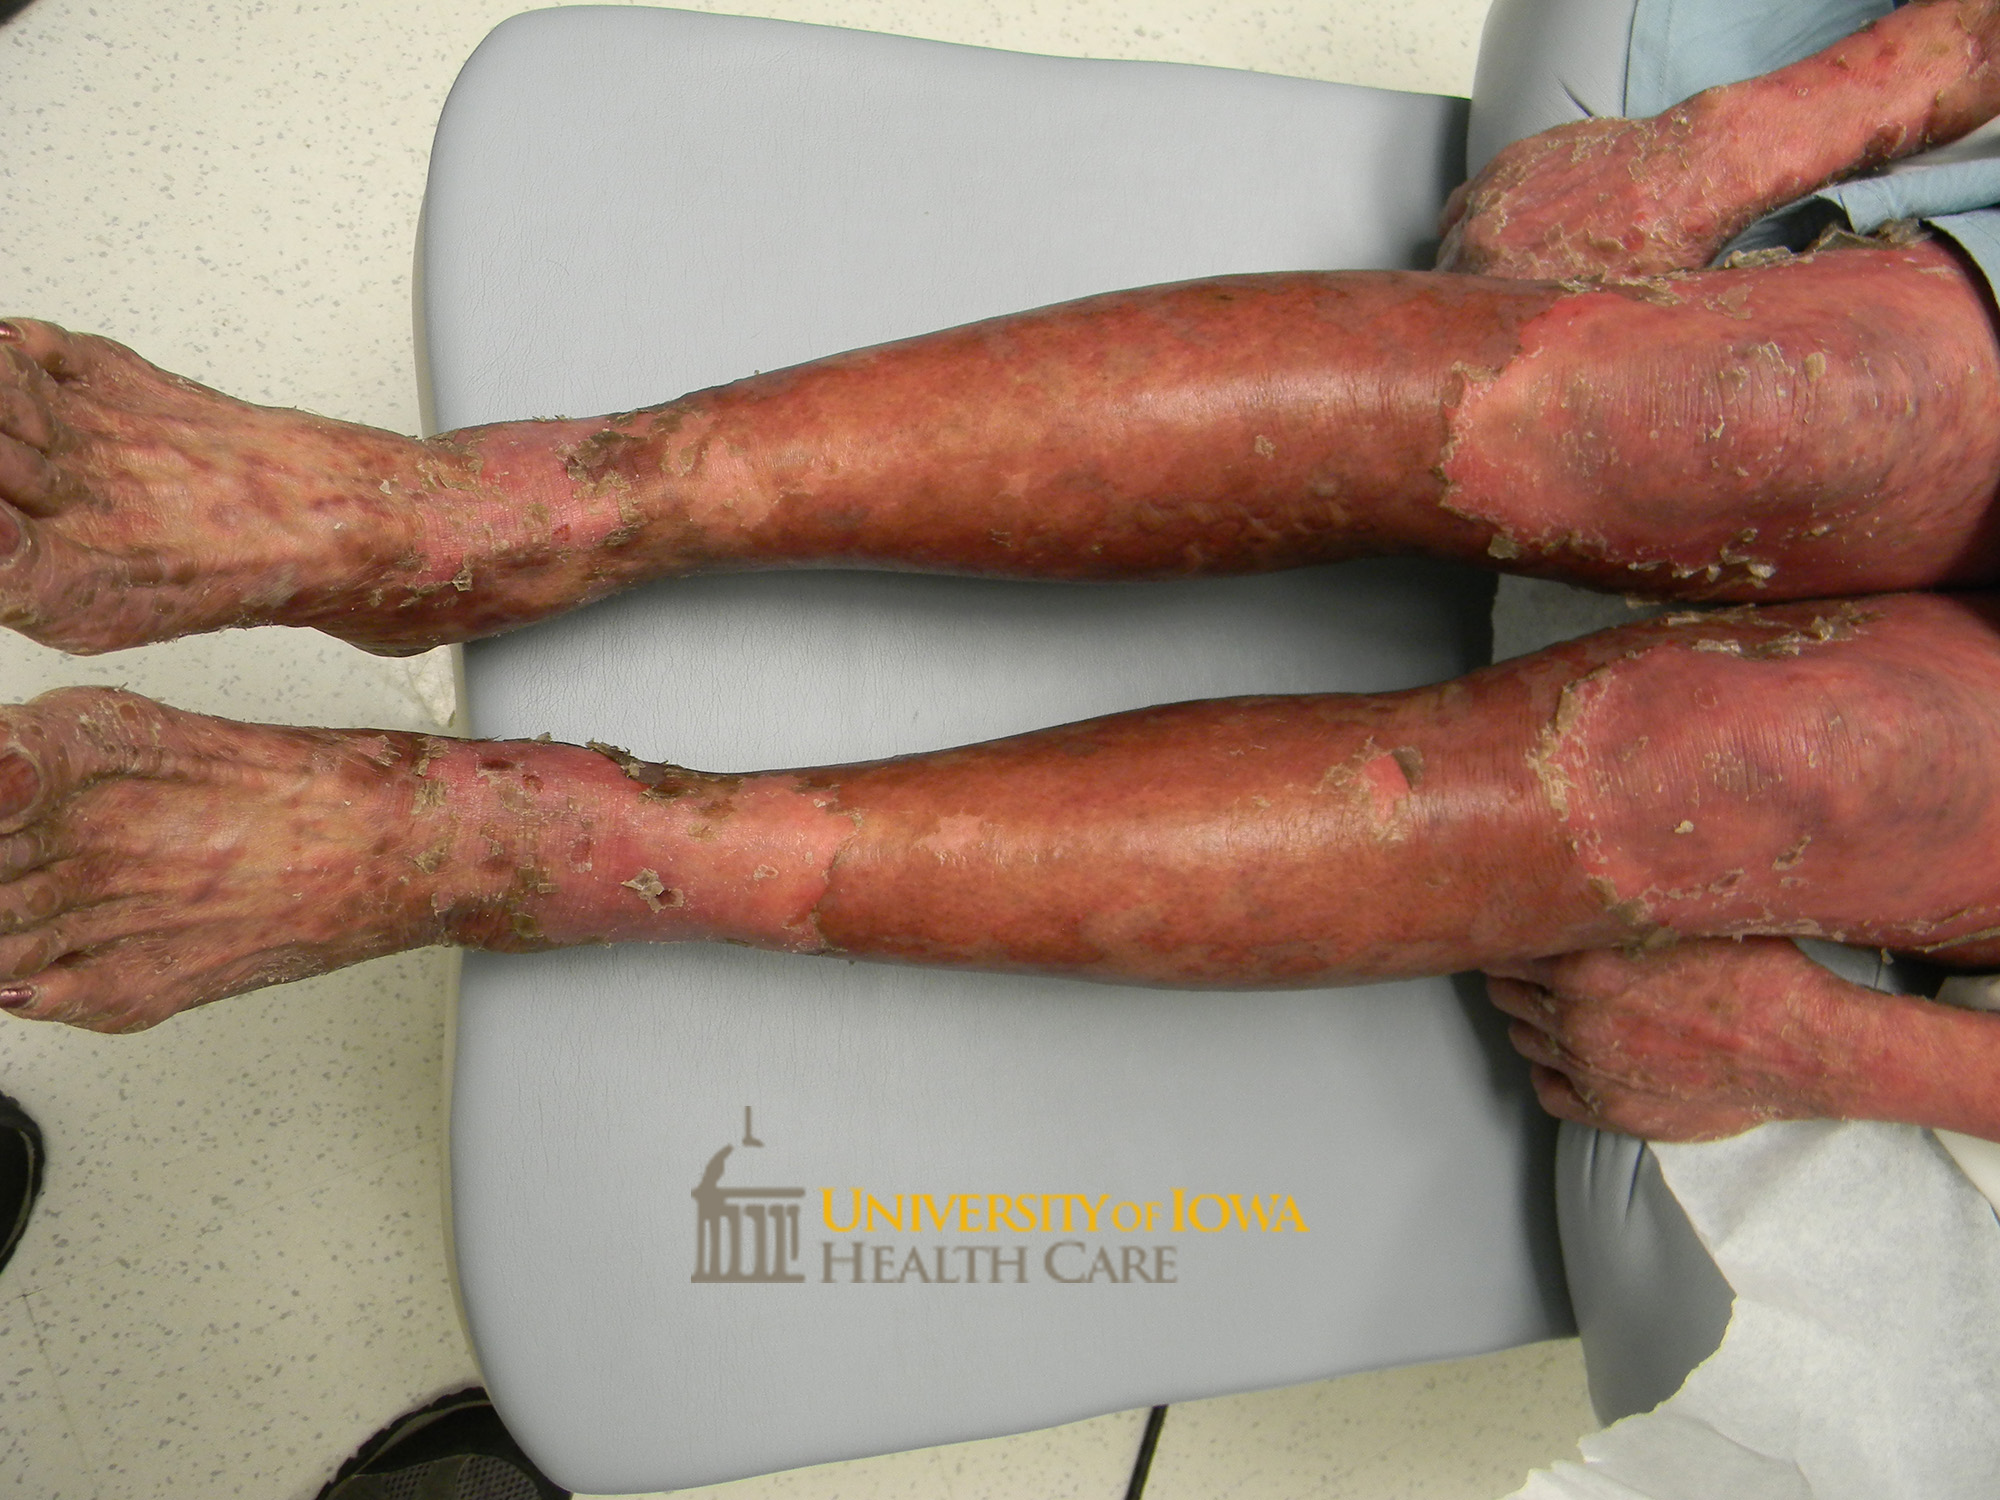 Superficial erosisons with collarette of scale and surrounding erythema on th elegs and arms. (click images for higher resolution).